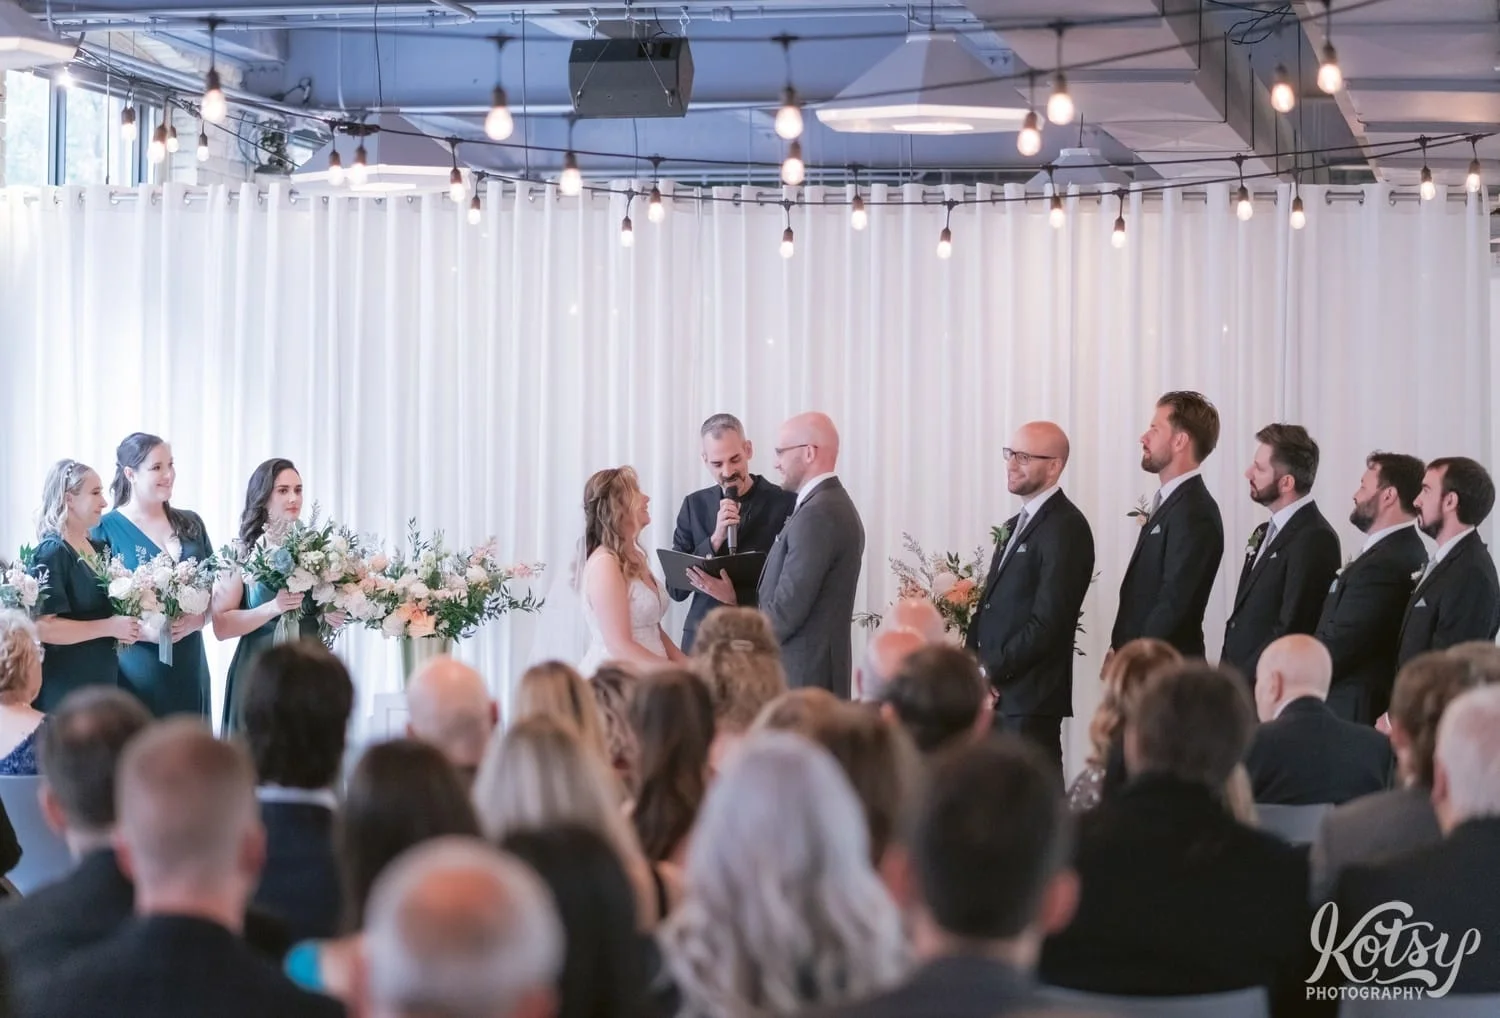 A wide shot of a bride wearing a white bridal gown and groom wearing a gray suit stand at the altar with their wedding party during their Second Floor Events wedding ceremony in Toronto, Canada